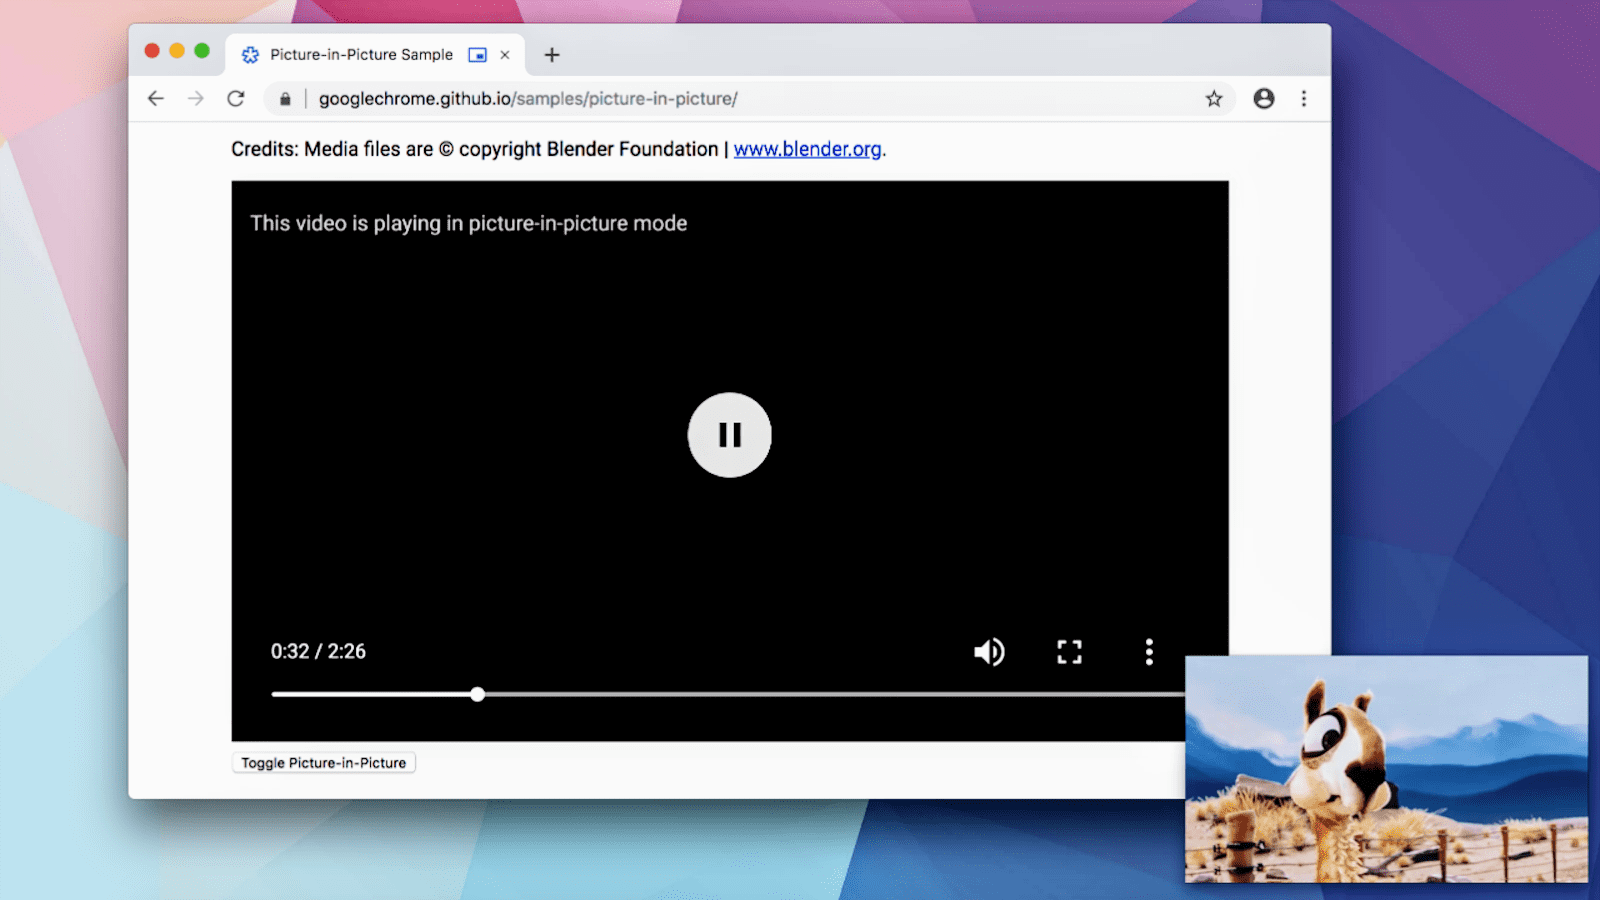 Chrome picture-in-picture allows users to keep watching a video from one tab, while working
in another tab.